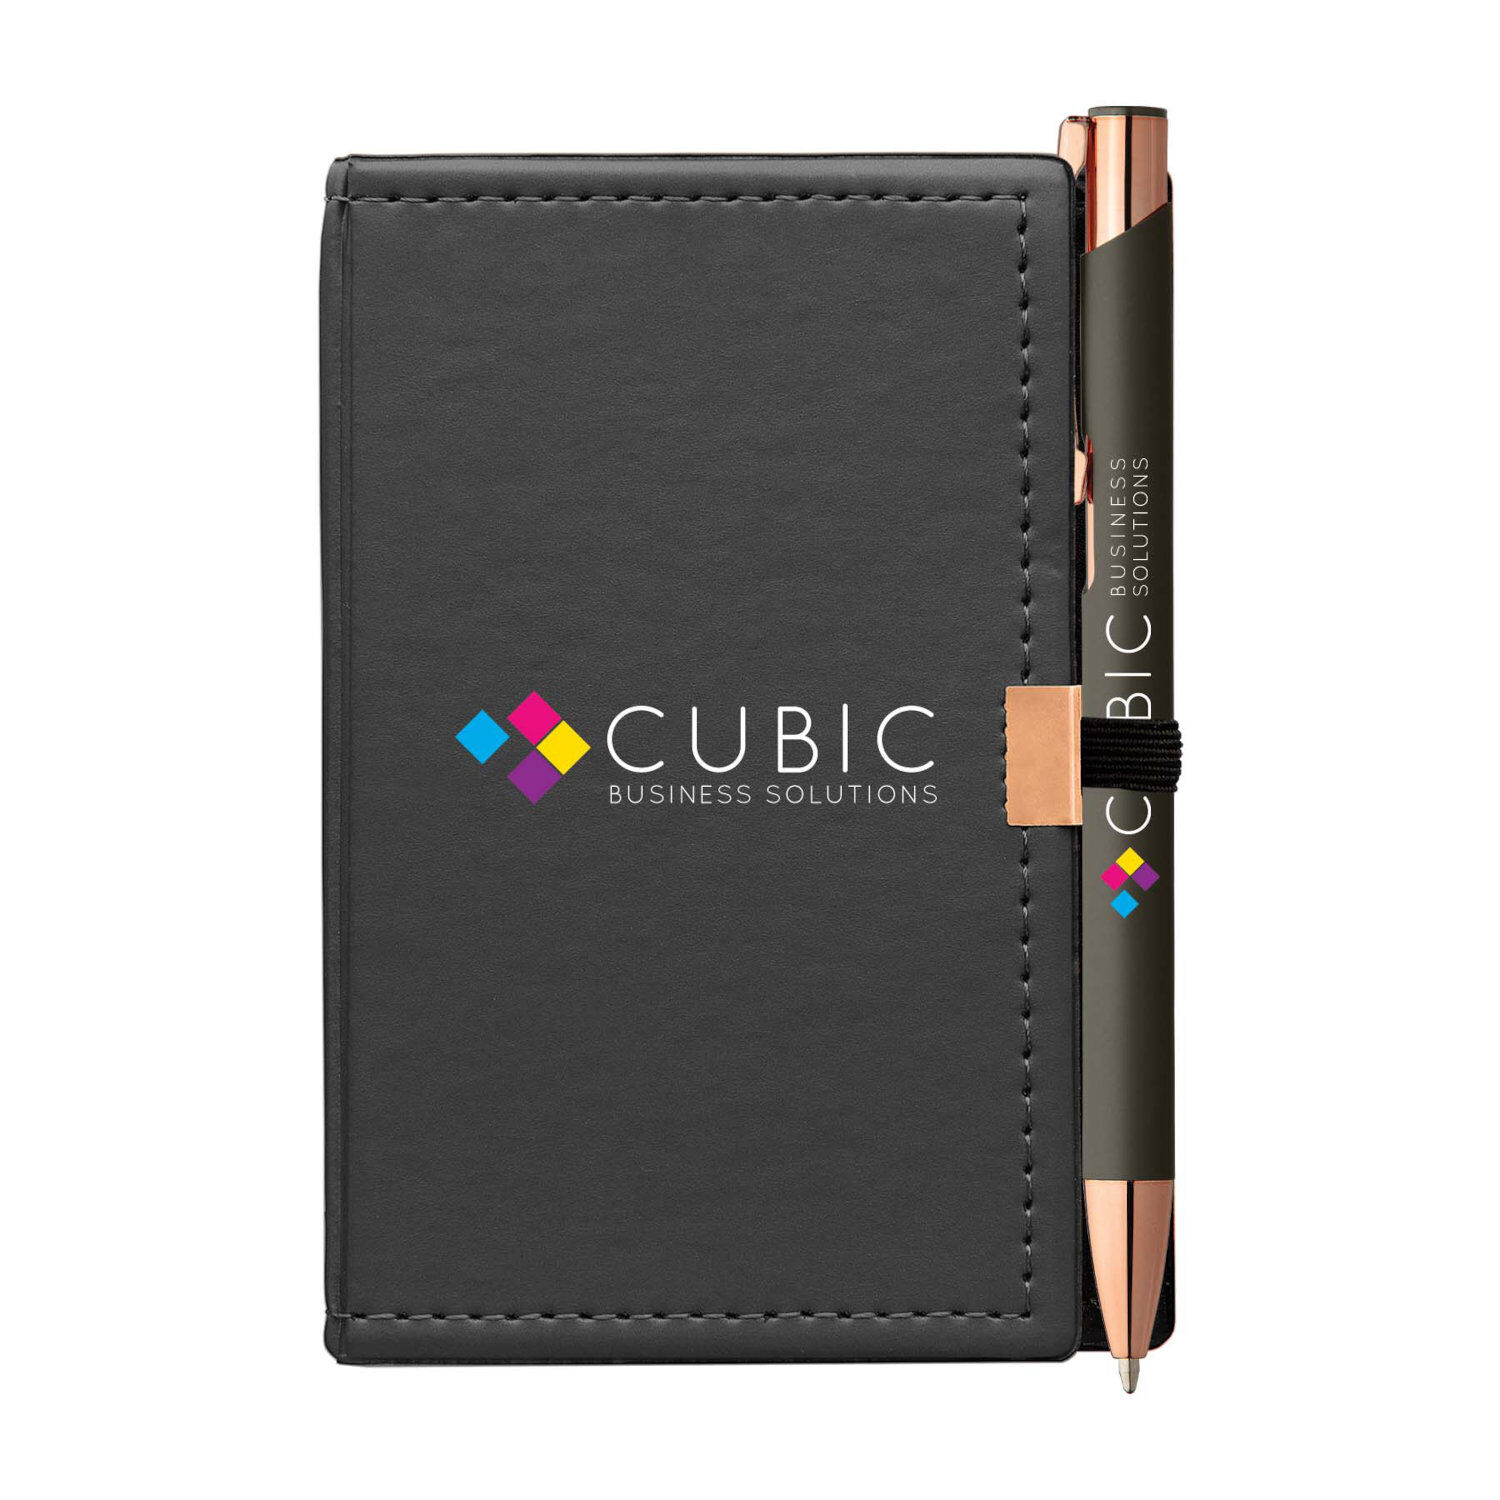 Note Caddy and Pen (with sample branding)